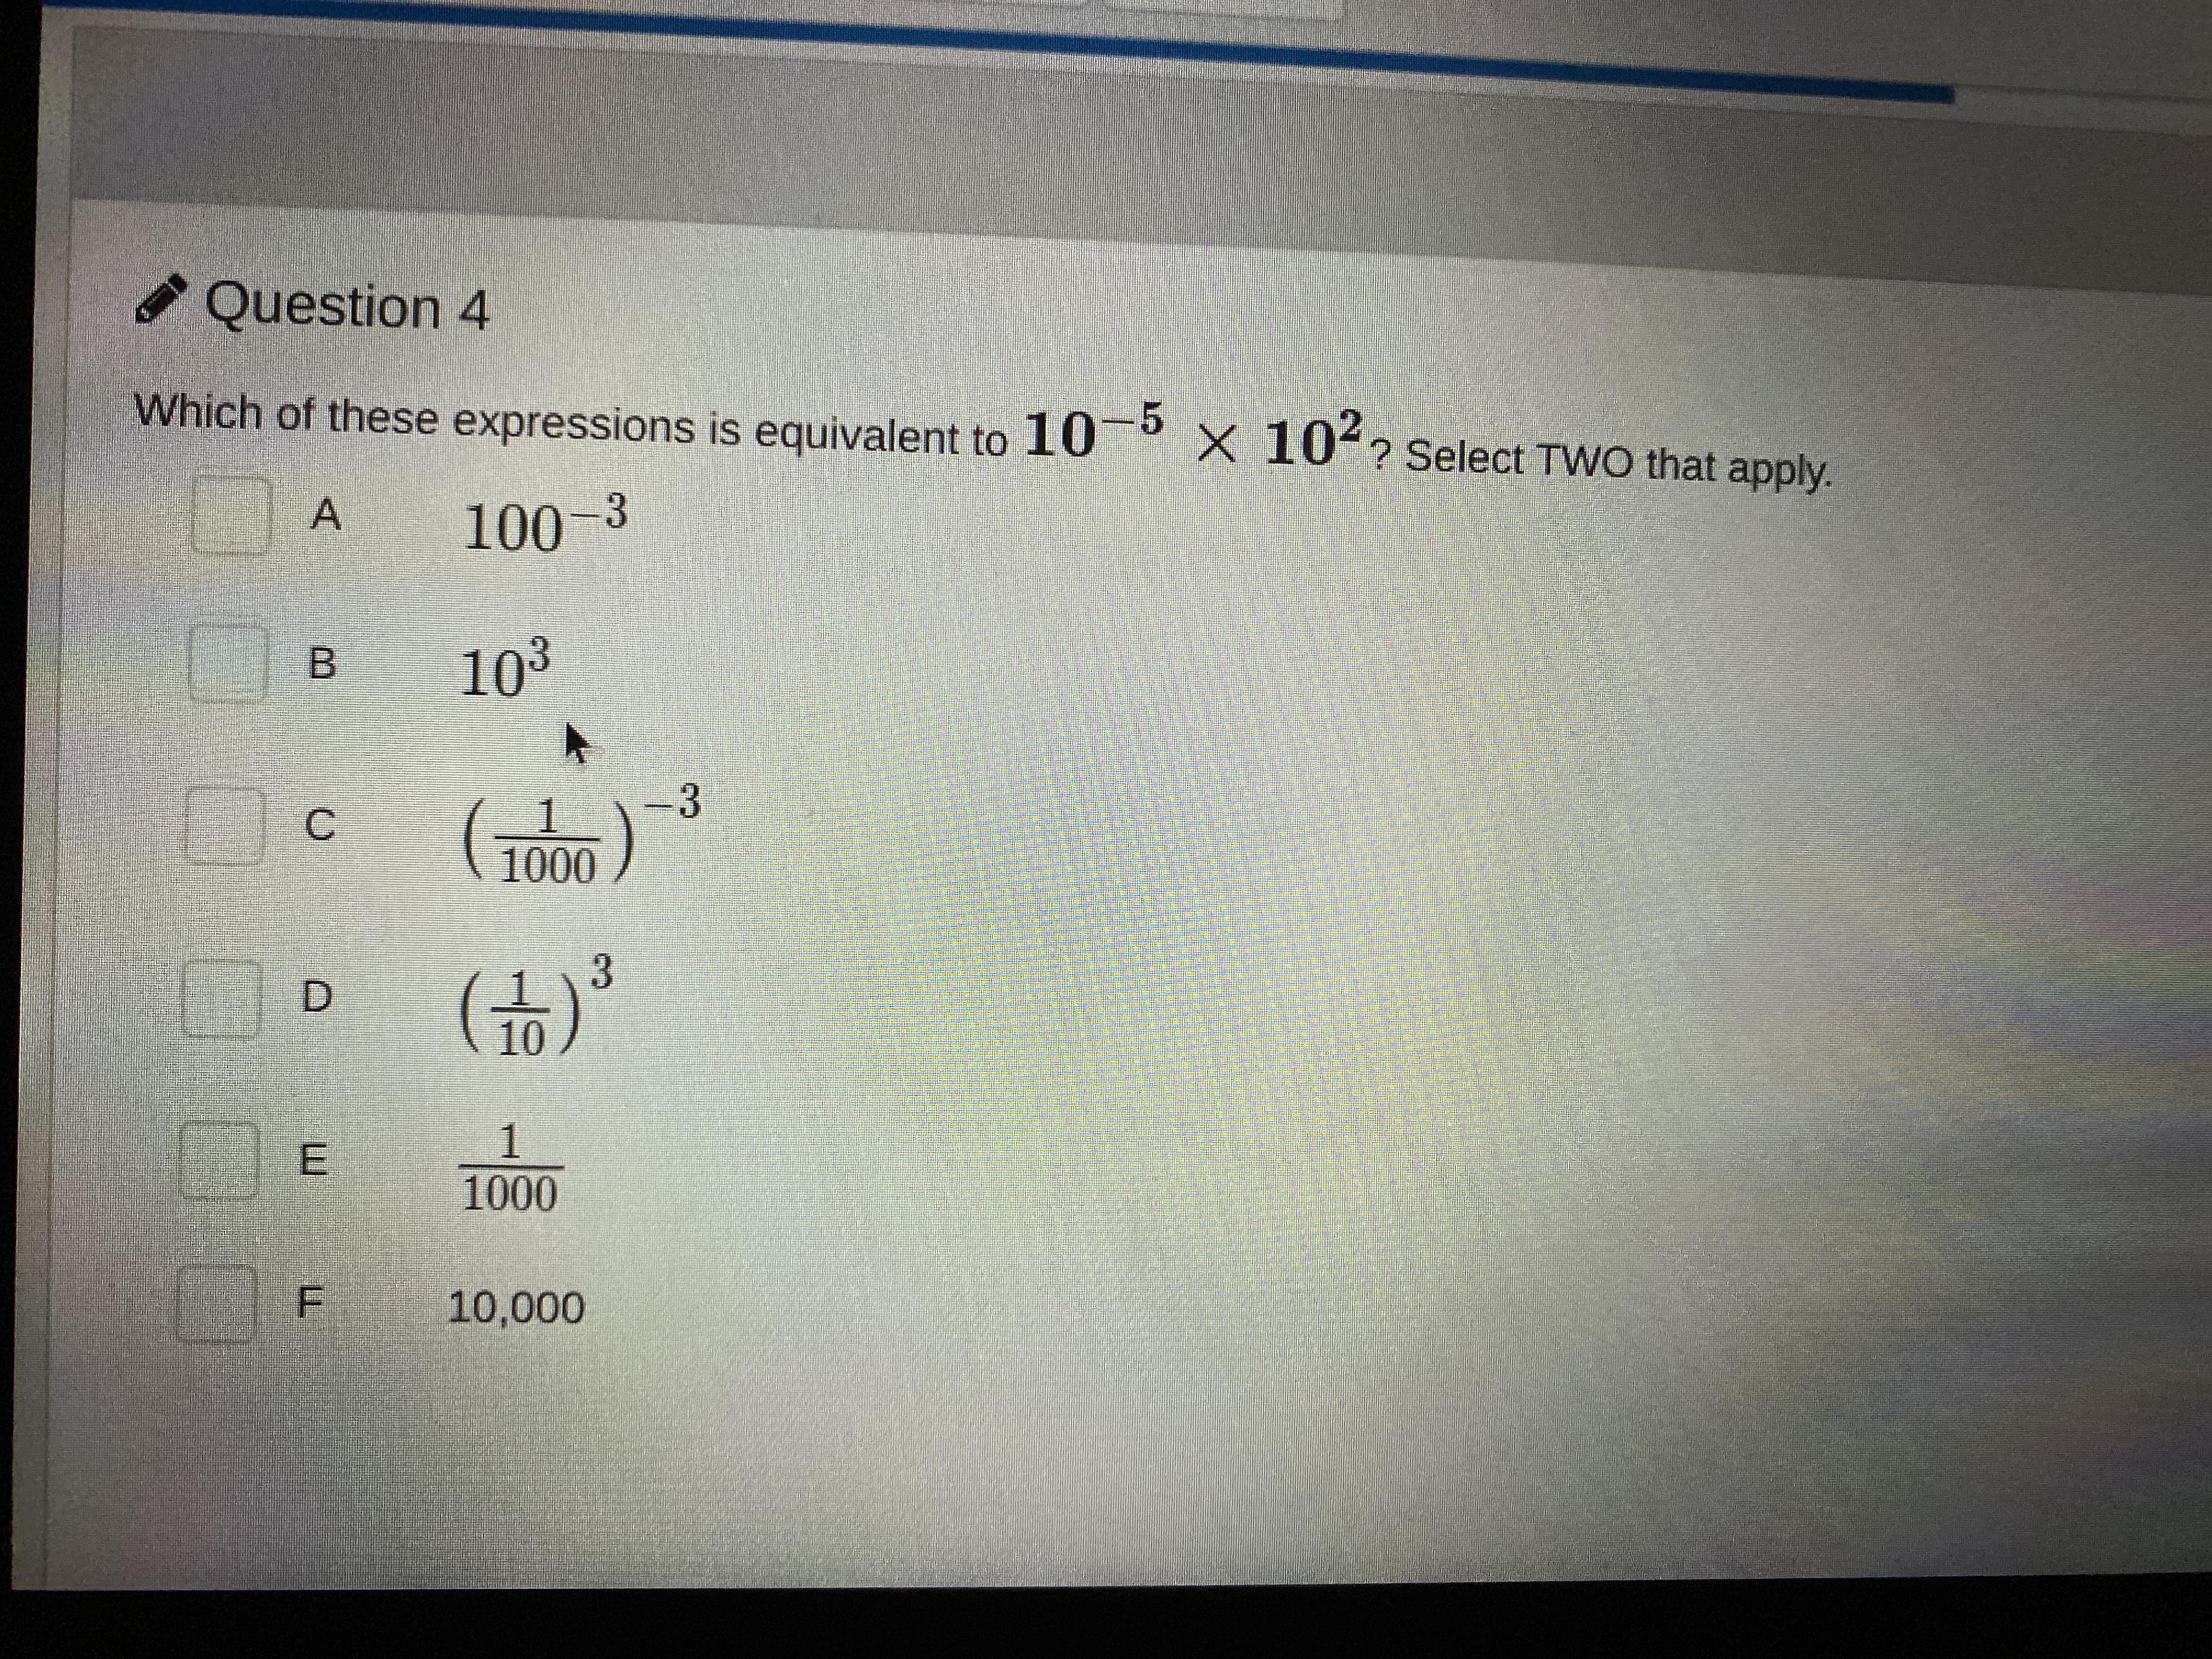 What Expressions Are Equivalent To 10^-5x10^2